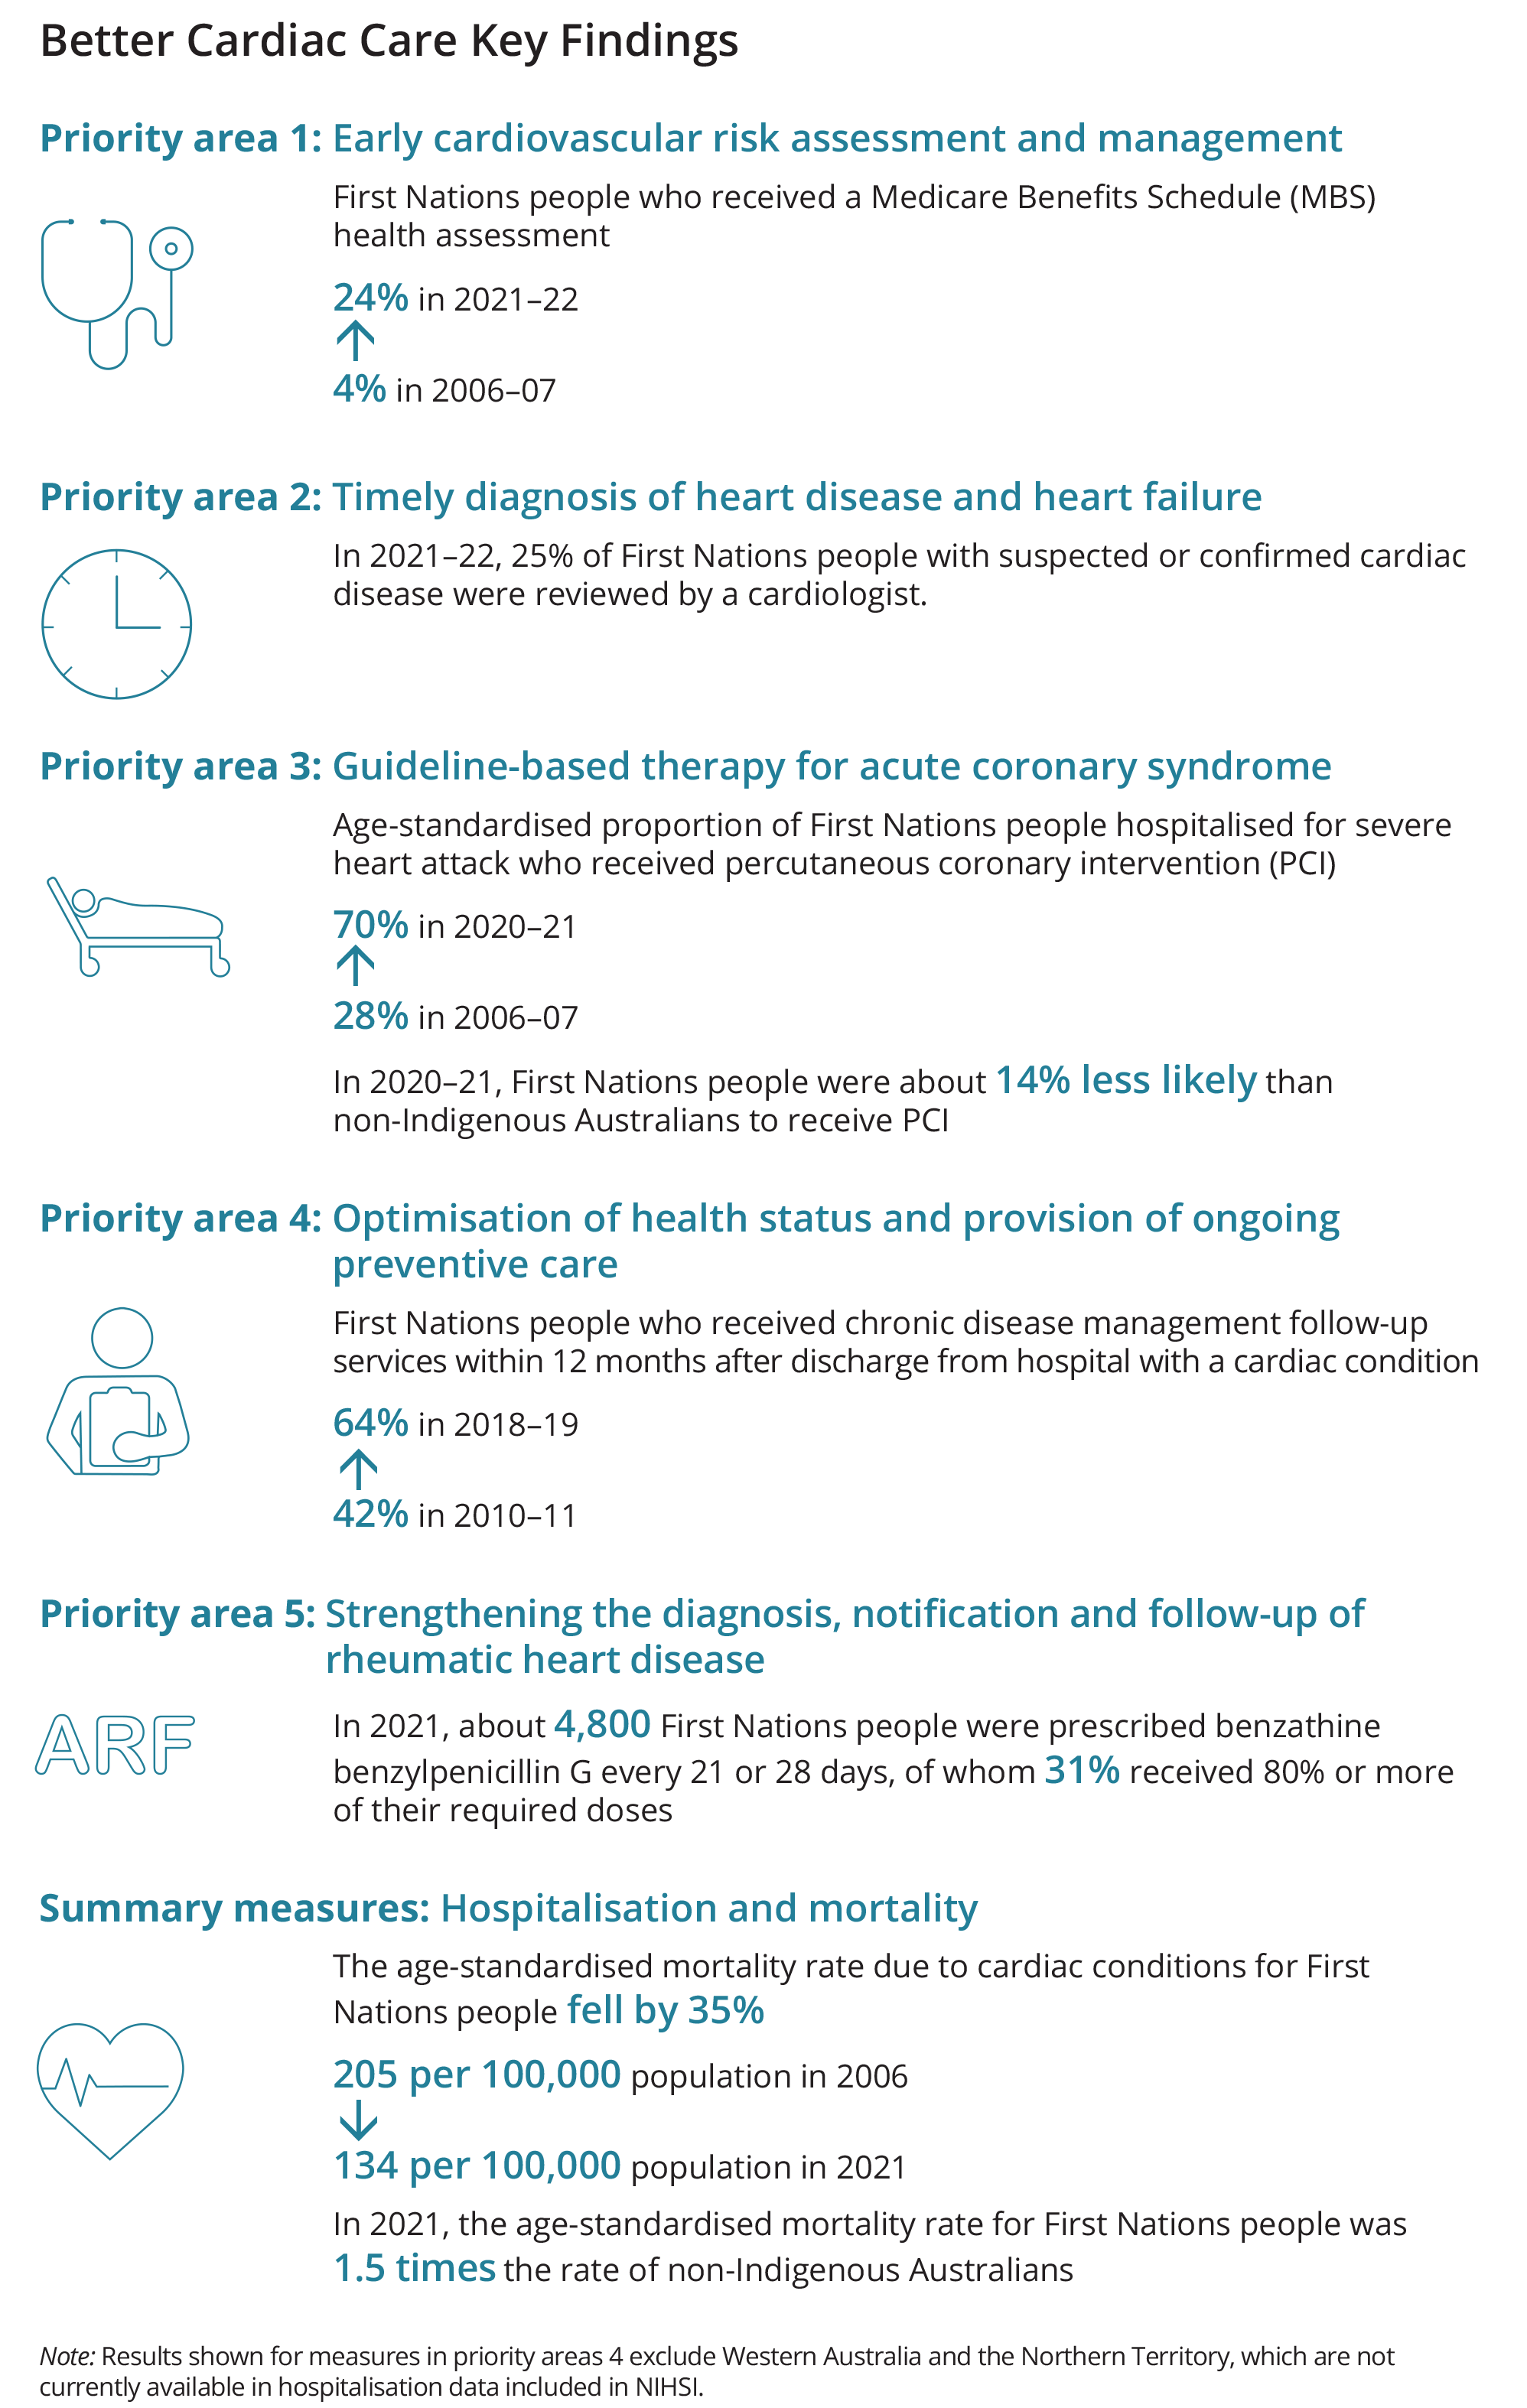 This infographic highlights the key findings of the report by each priority area. For priority area 1: early cardiovascular risk assessment and management, the proportion of First Nations people who received a Medicare Benefits Schedule health assessment rose from 4% in 2006–07 to 24% in 2021–22. For priority area 2: timely diagnosis of heart disease and heart failure, the proportion of First Nations people with suspected or confirmed cardiac disease who were reviewed by a cardiologist was 25% in 2021-22. For priority area 3: guideline-based therapy for acute coronary syndrome, the age-standardised proportion of First Nations people hospitalised for severe heart attack who received percutaneous coronary intervention (PCI) rose from 28% in 2006–07 to 70% in 2020–21. In 2020-21, First Nations people were about 14% less likely than non-Indigenous Australians to receive PCI. For priority area 4: optimisation of health status and provision of ongoing preventive care, the proportion of First Nations people who received chronic disease management follow-up services within 12 months after discharge from hospital with a cardiac condition rose from 42% in 2010-11 to 64% in 2018-19. For priority area 5: diagnosis, notification and follow-up of rheumatic heart disease, in 2021, about 4,800 First Nations people were prescribed benzathine benzylpenicillin G every 21 or 28 days, of whom 31% received 80% or more of their required doses. For the summary measures: hospitalisation and mortality, the age-standardised mortality rate due to cardiac conditions for First Nations people fell by 35% from 205 per 100,000 population in 2006 to 134 per 100,000 population in 2021, but in 2021, the age-standardised mortality rate for First Nations people was 1.5 times the rate of non-Indigenous Australians.